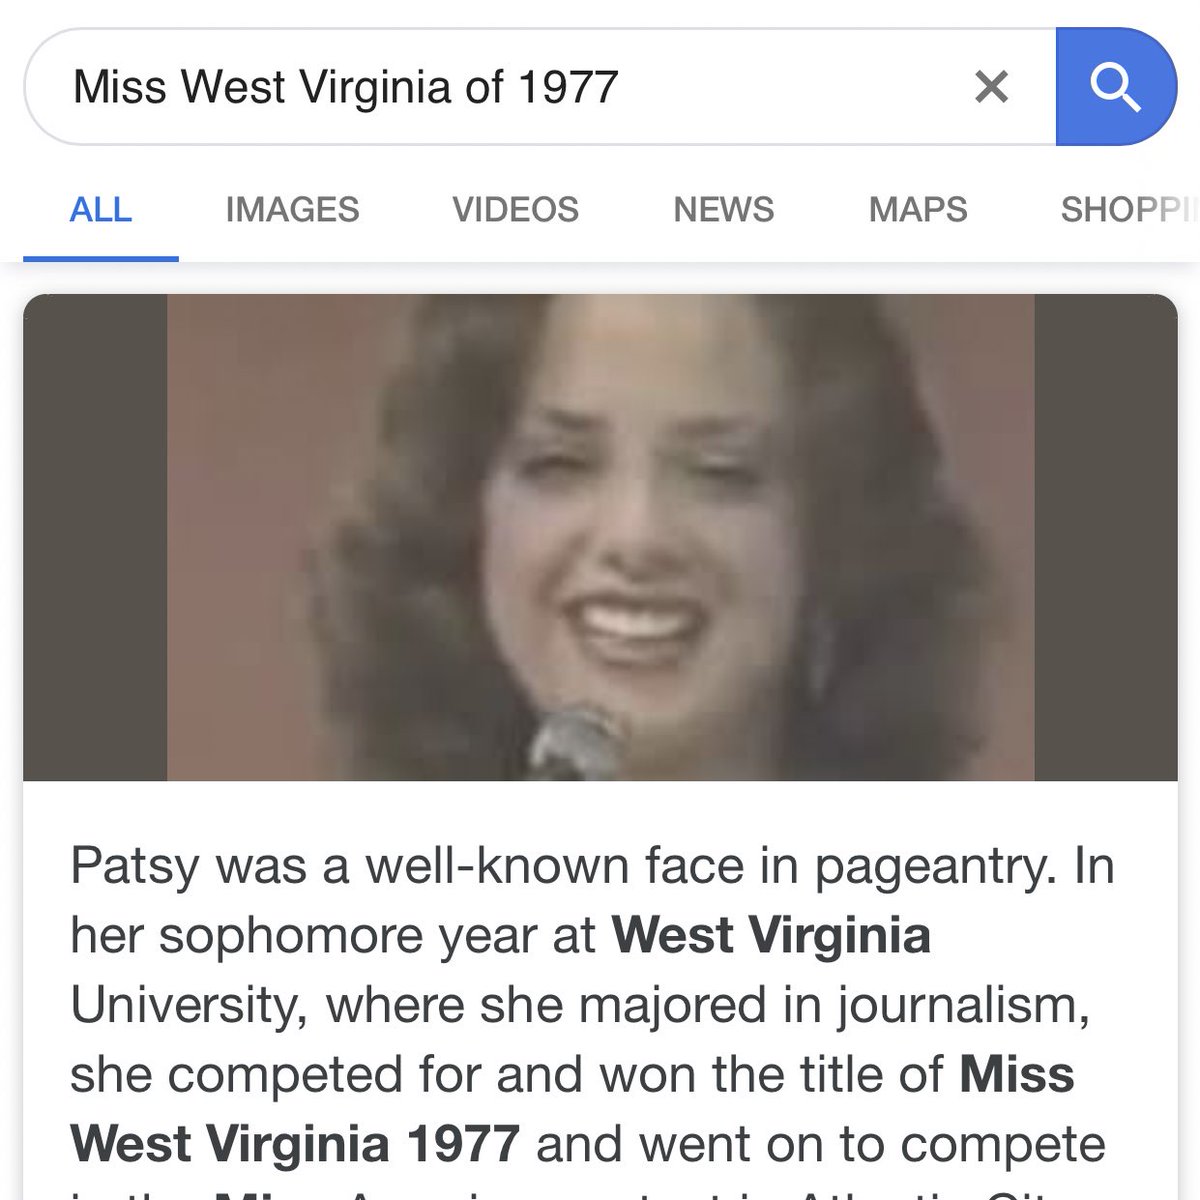 According to her LA Times obituary:“Patricia Ann Paugh was born Dec. 29, 1956, and raised in West Virginia. She was crowned Miss West Virginia, for the 1977 Miss America contest.”First time around, nothing to see.But with fresh eyes, nothing exists. https://www.misswestvirginiausa.com/past-titleholders